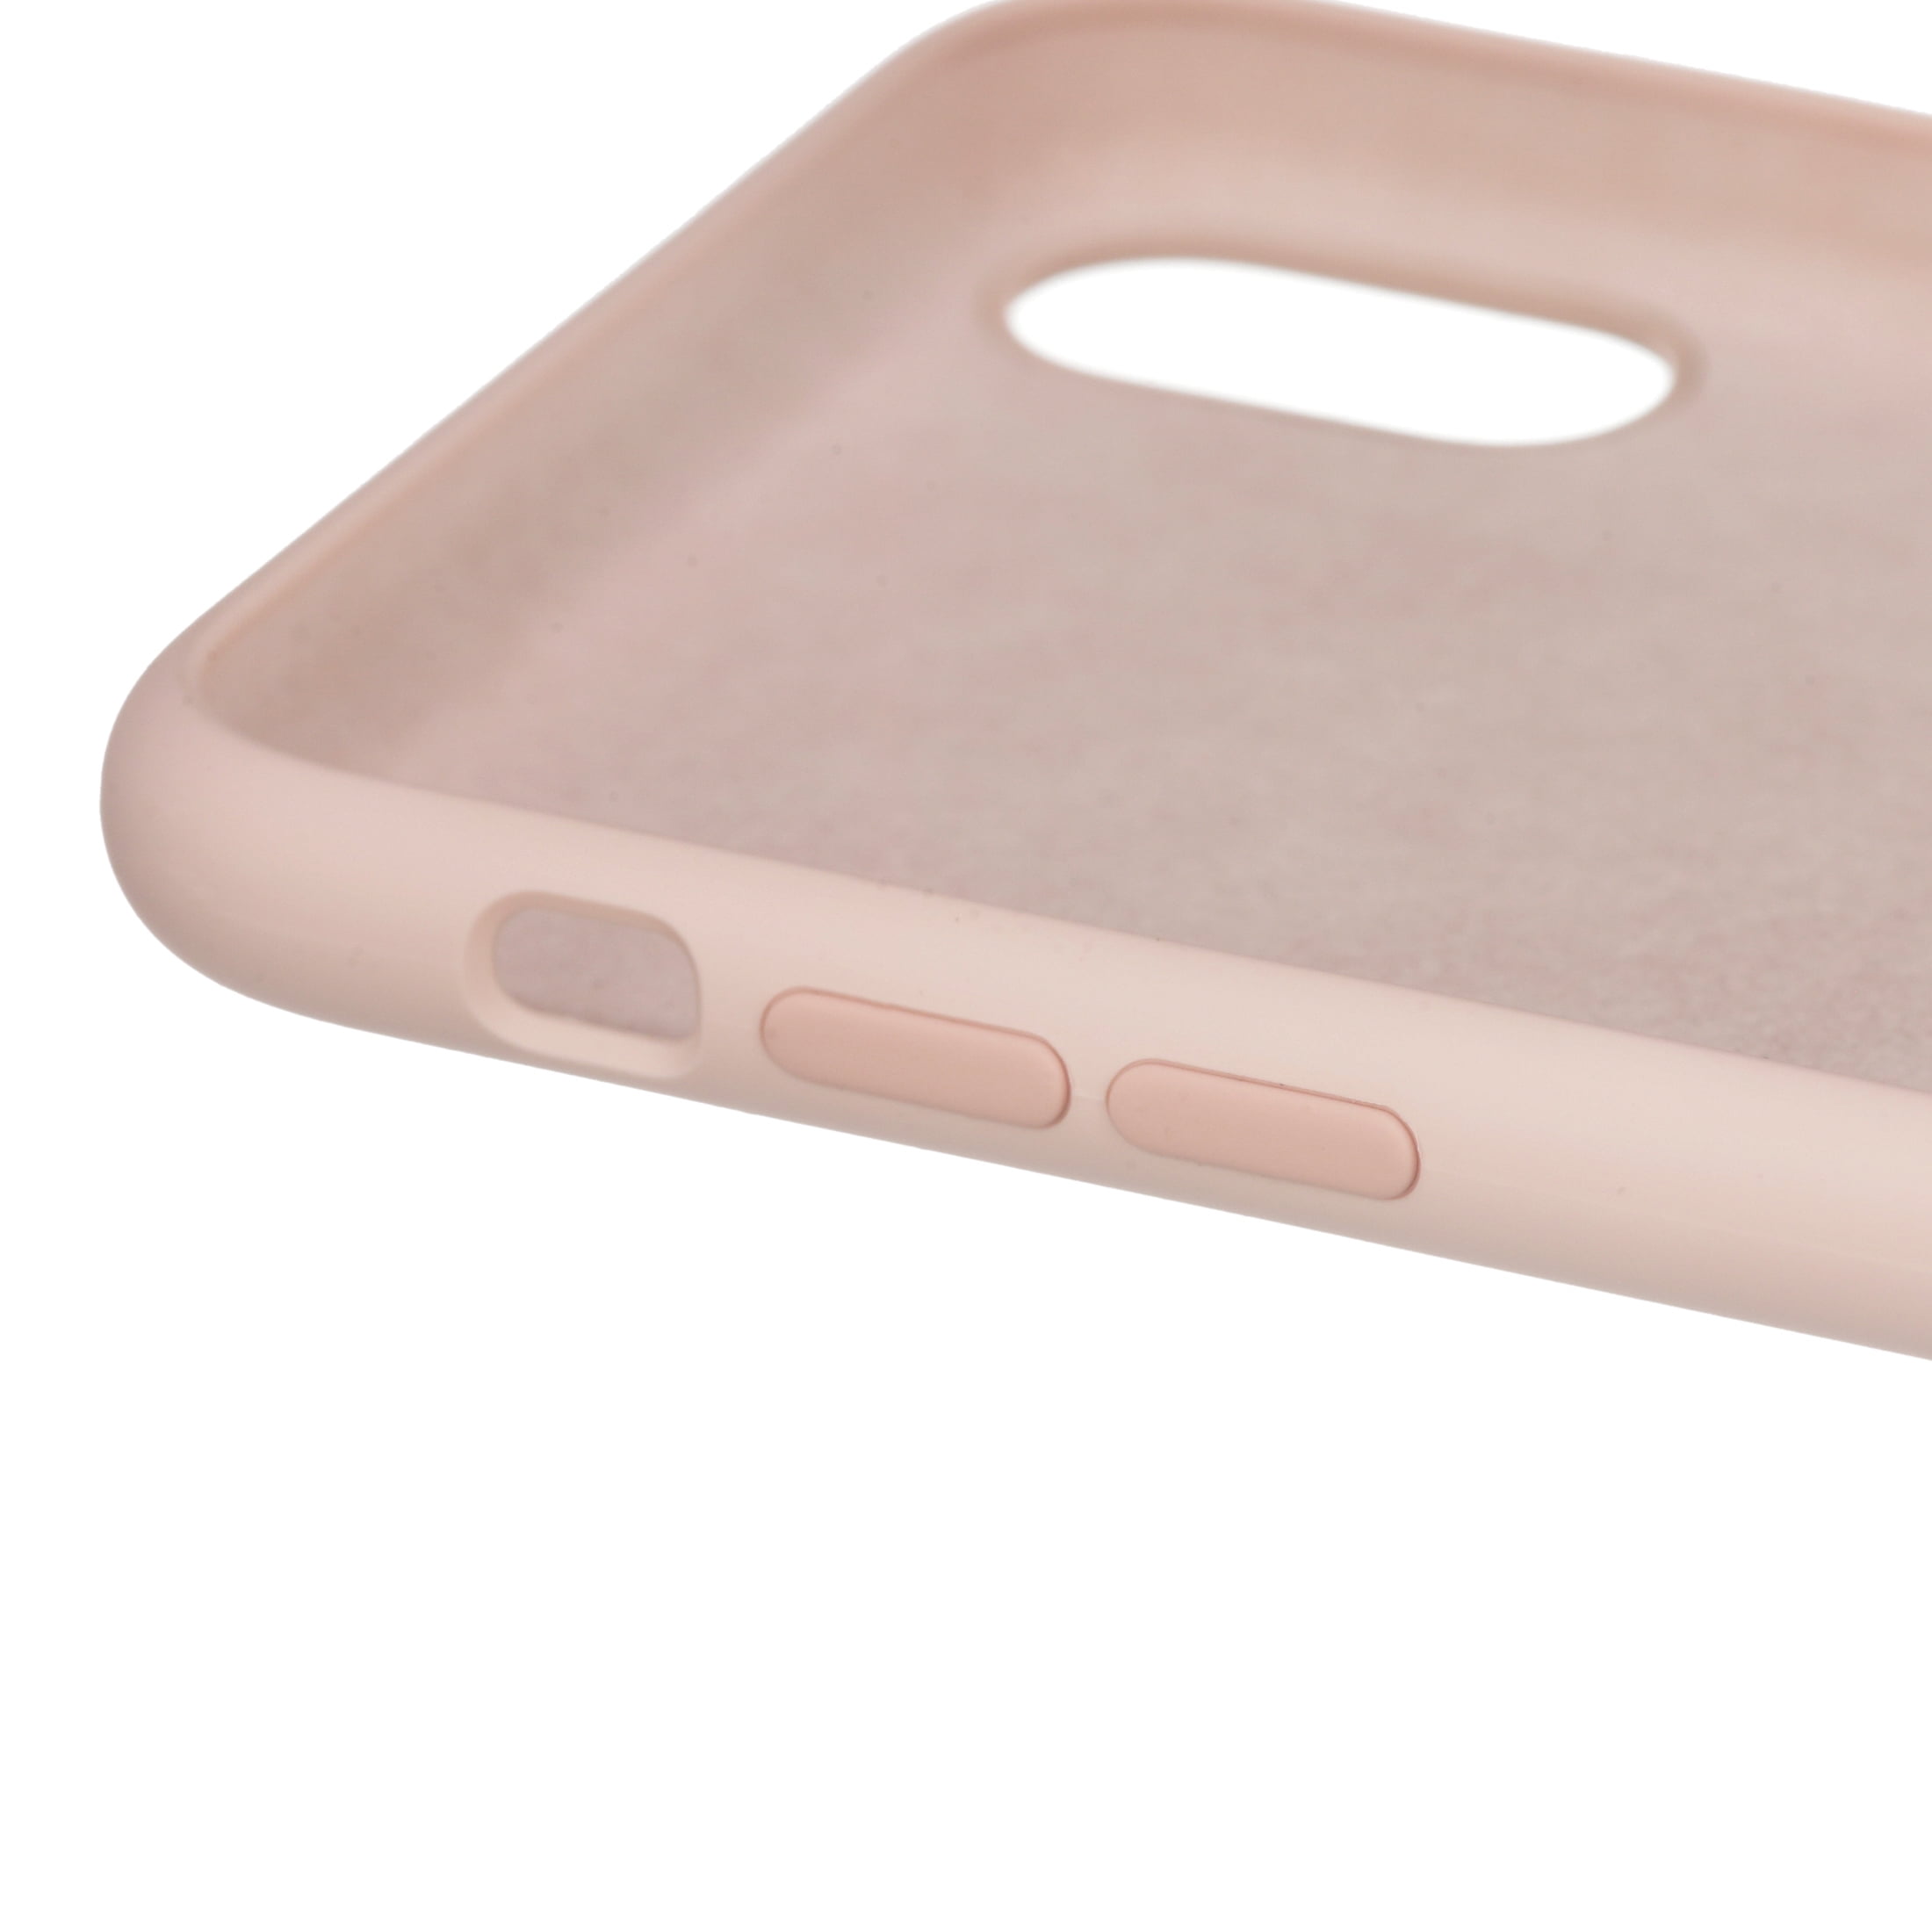 iPhone XS Max Silicone Case - Pink Sand - Apple (IE)